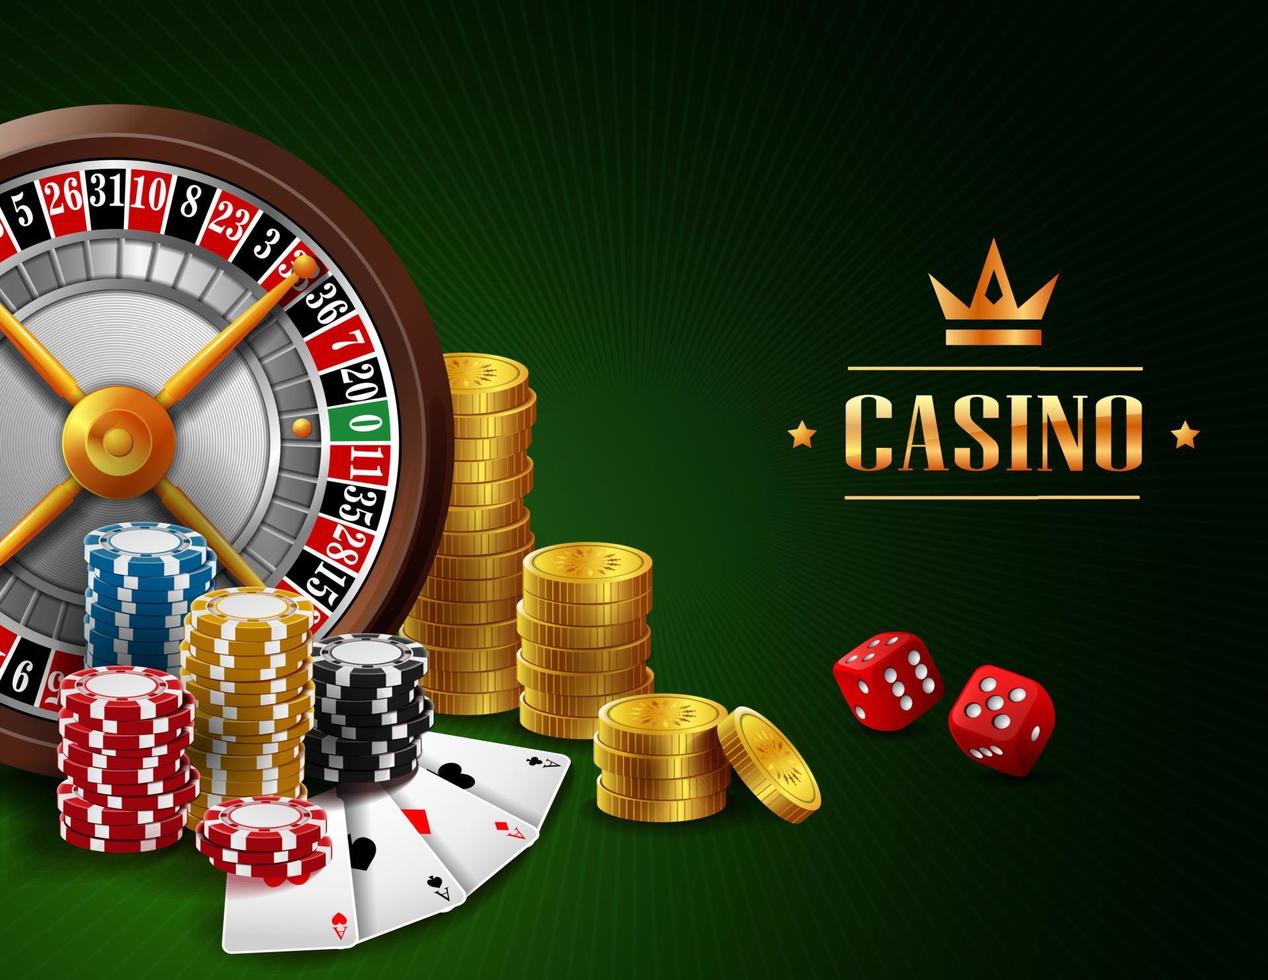 Casino background with gambling element vector